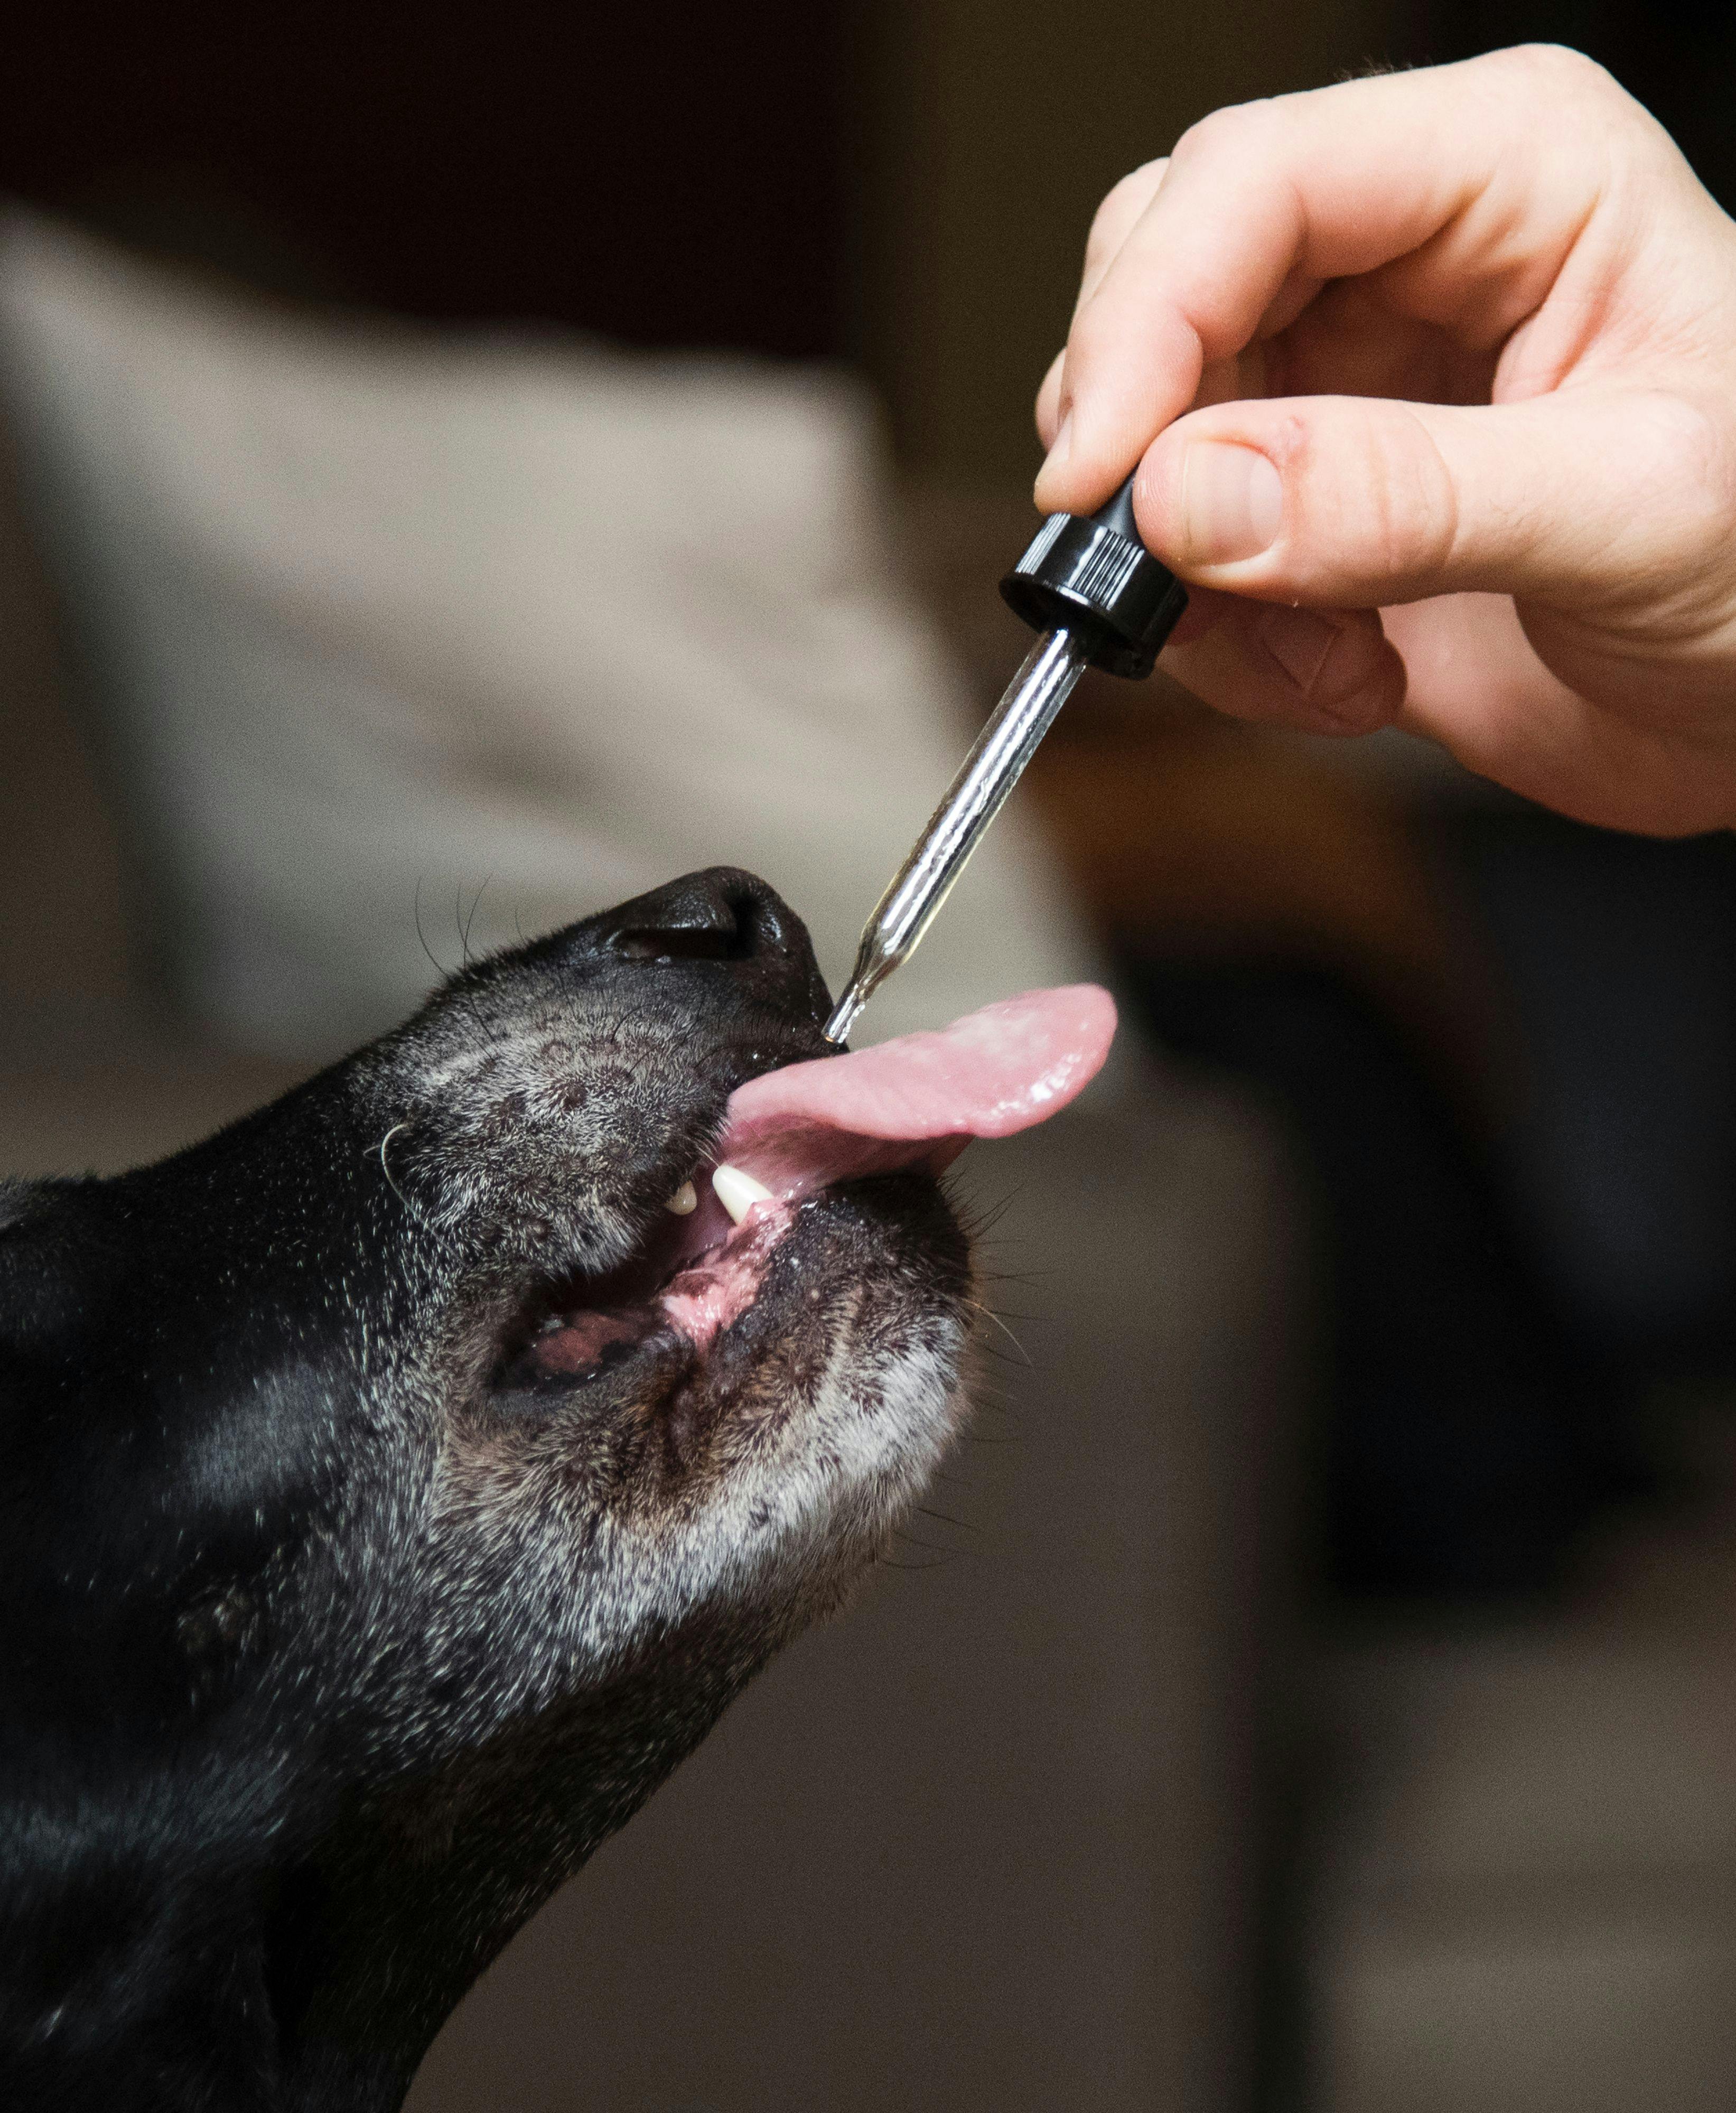 Apparently Dog Overdoses Are a Growing Problem in Canada2 Canadian Vet Warns Dog Overdoses from Cannabis are on the Rise